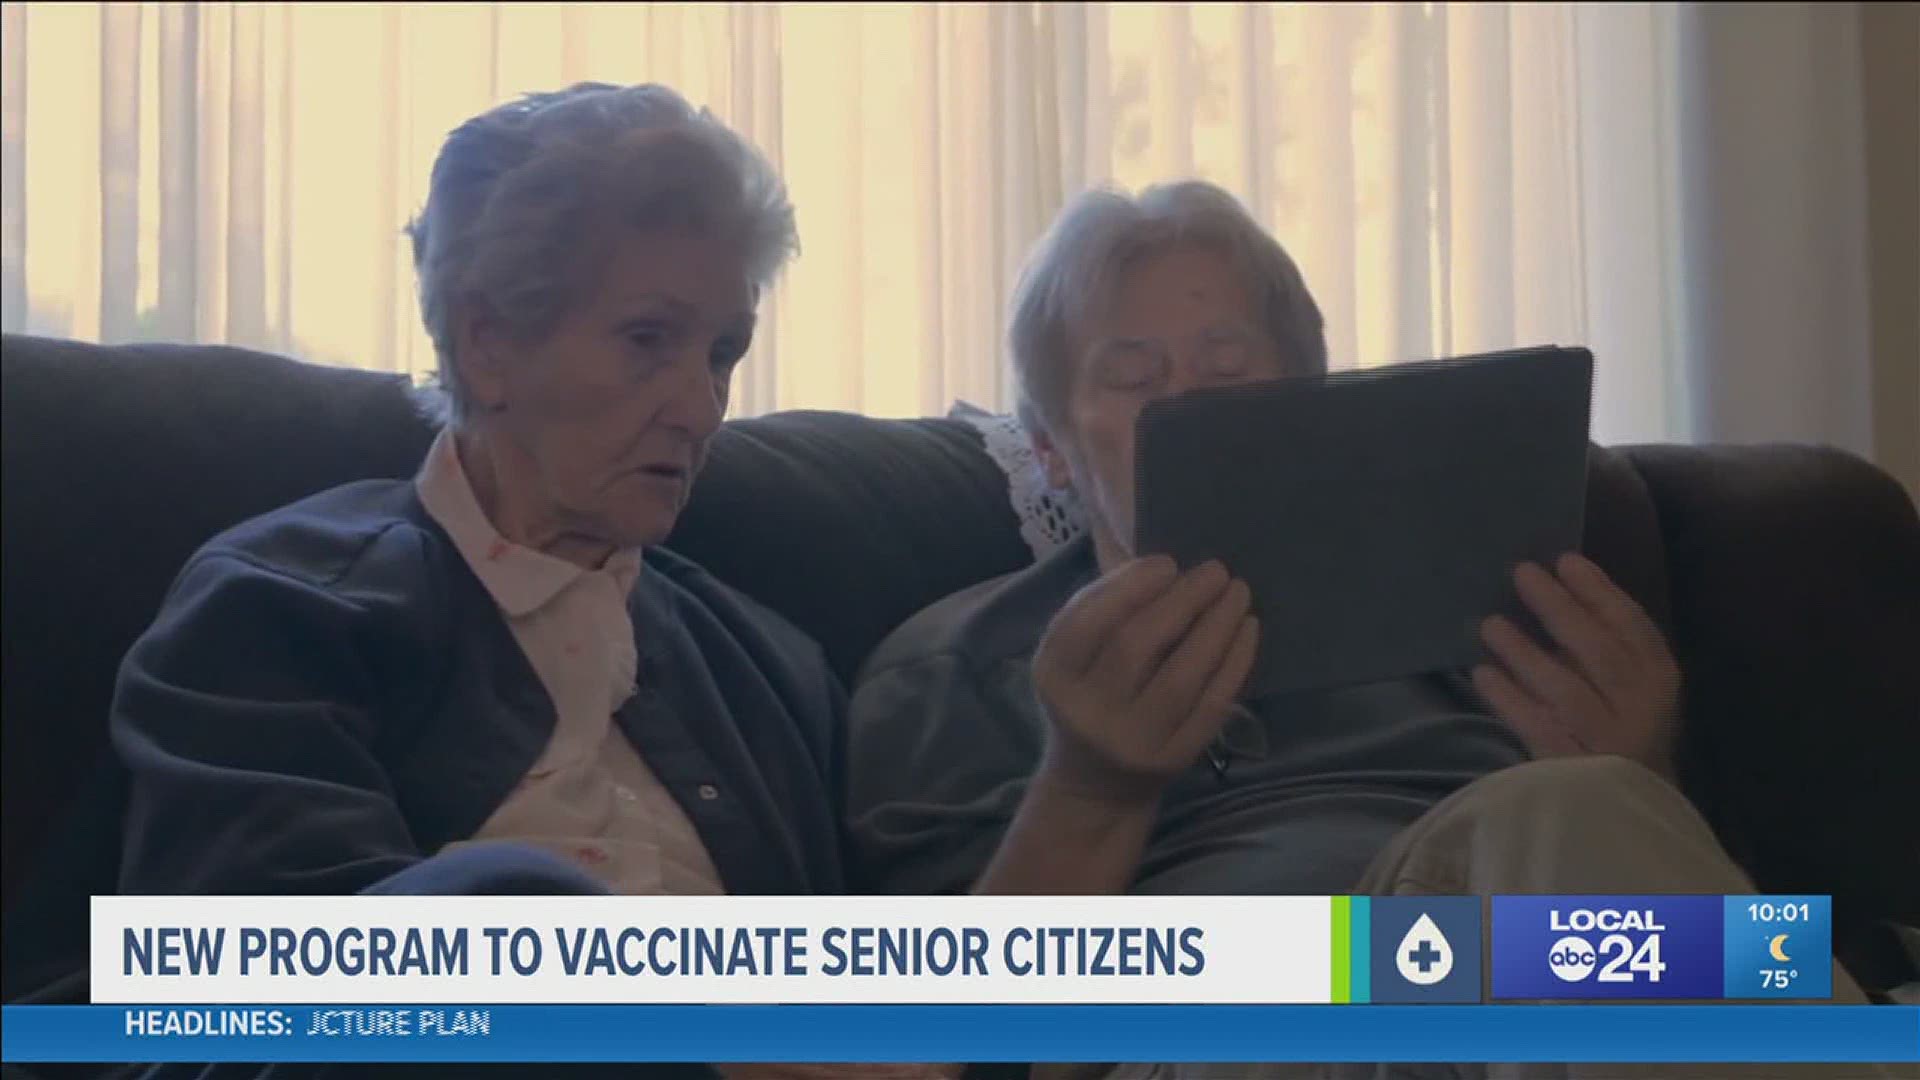 The Aging Commission plans for COVID-19 vaccinations to be administered at home or anywhere seniors request.